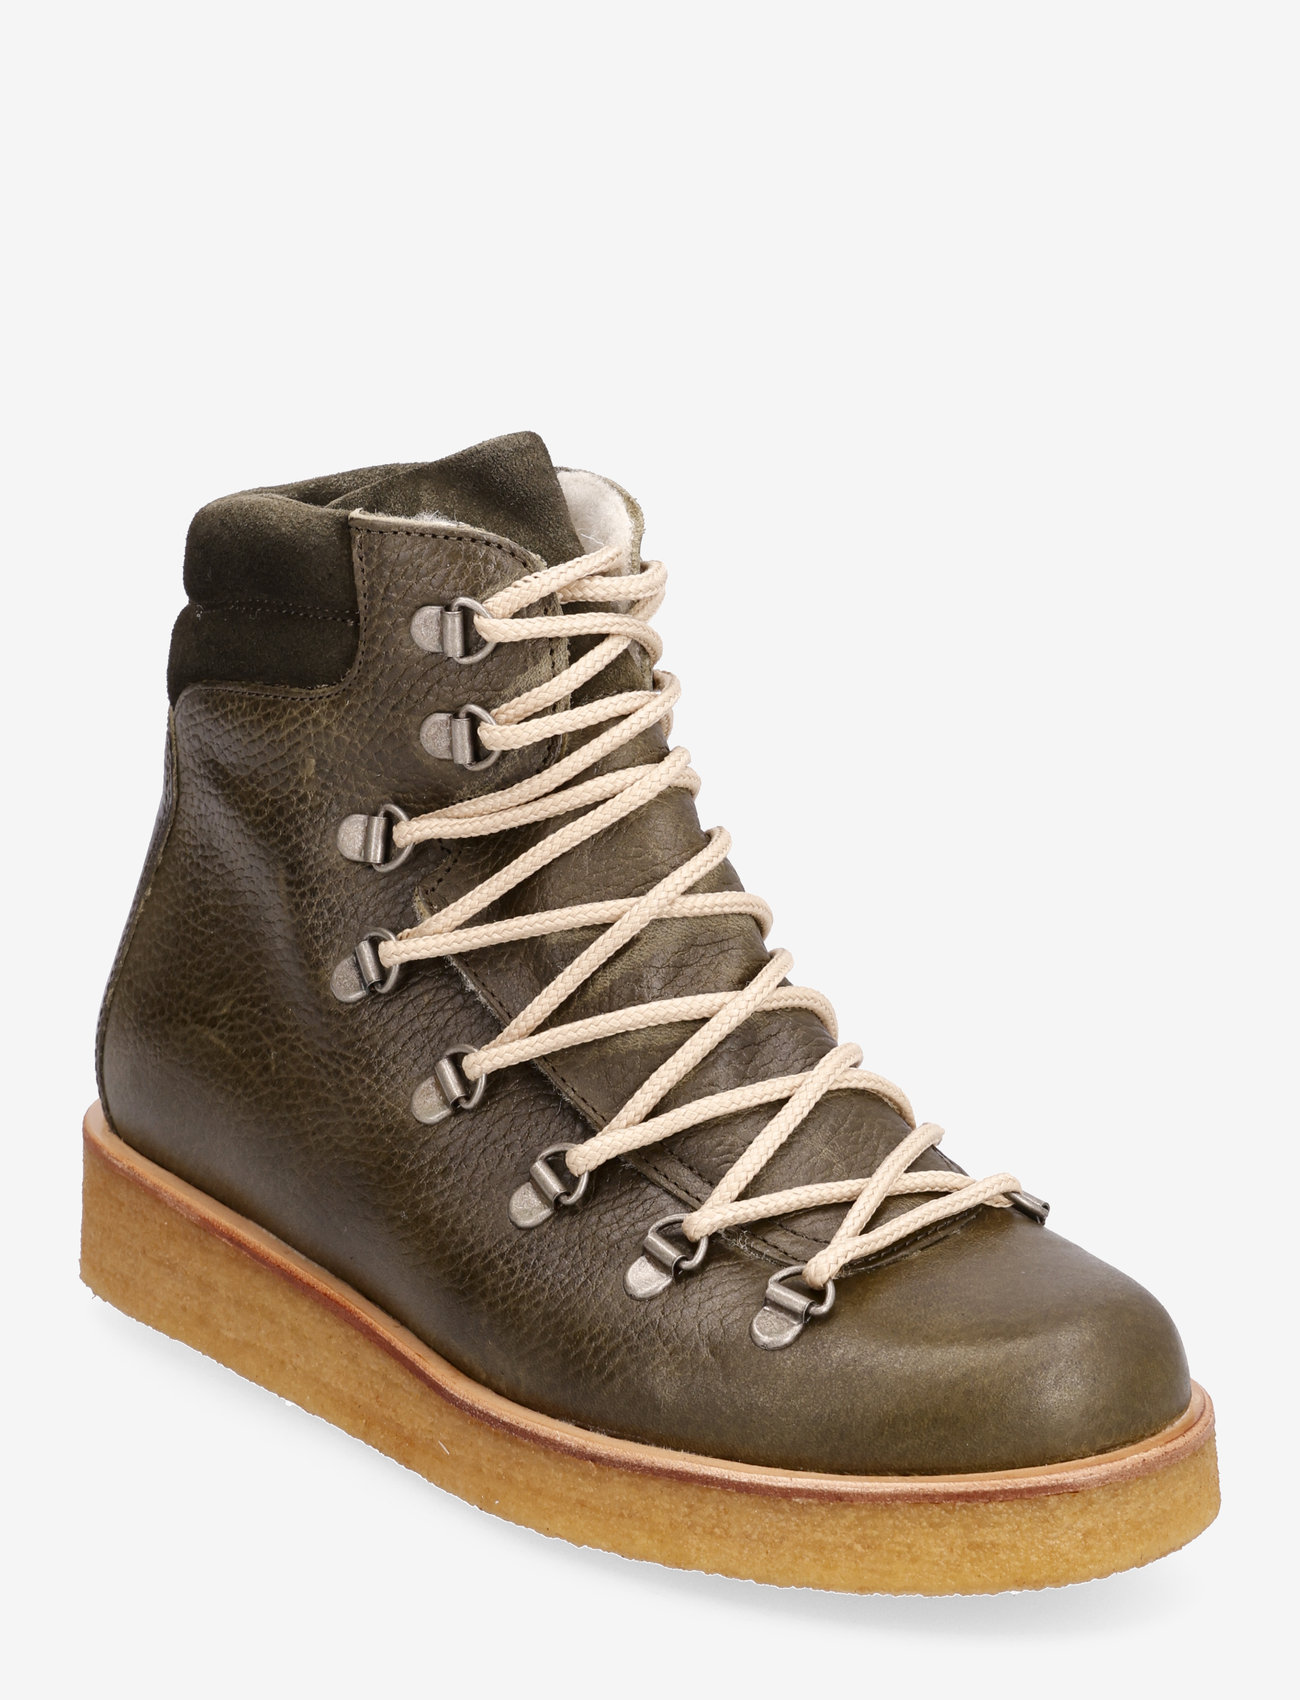 ANGULUS - Boots - flat - with laces - flade ankelstøvler - 1724/2244 moss green/dark gree - 0